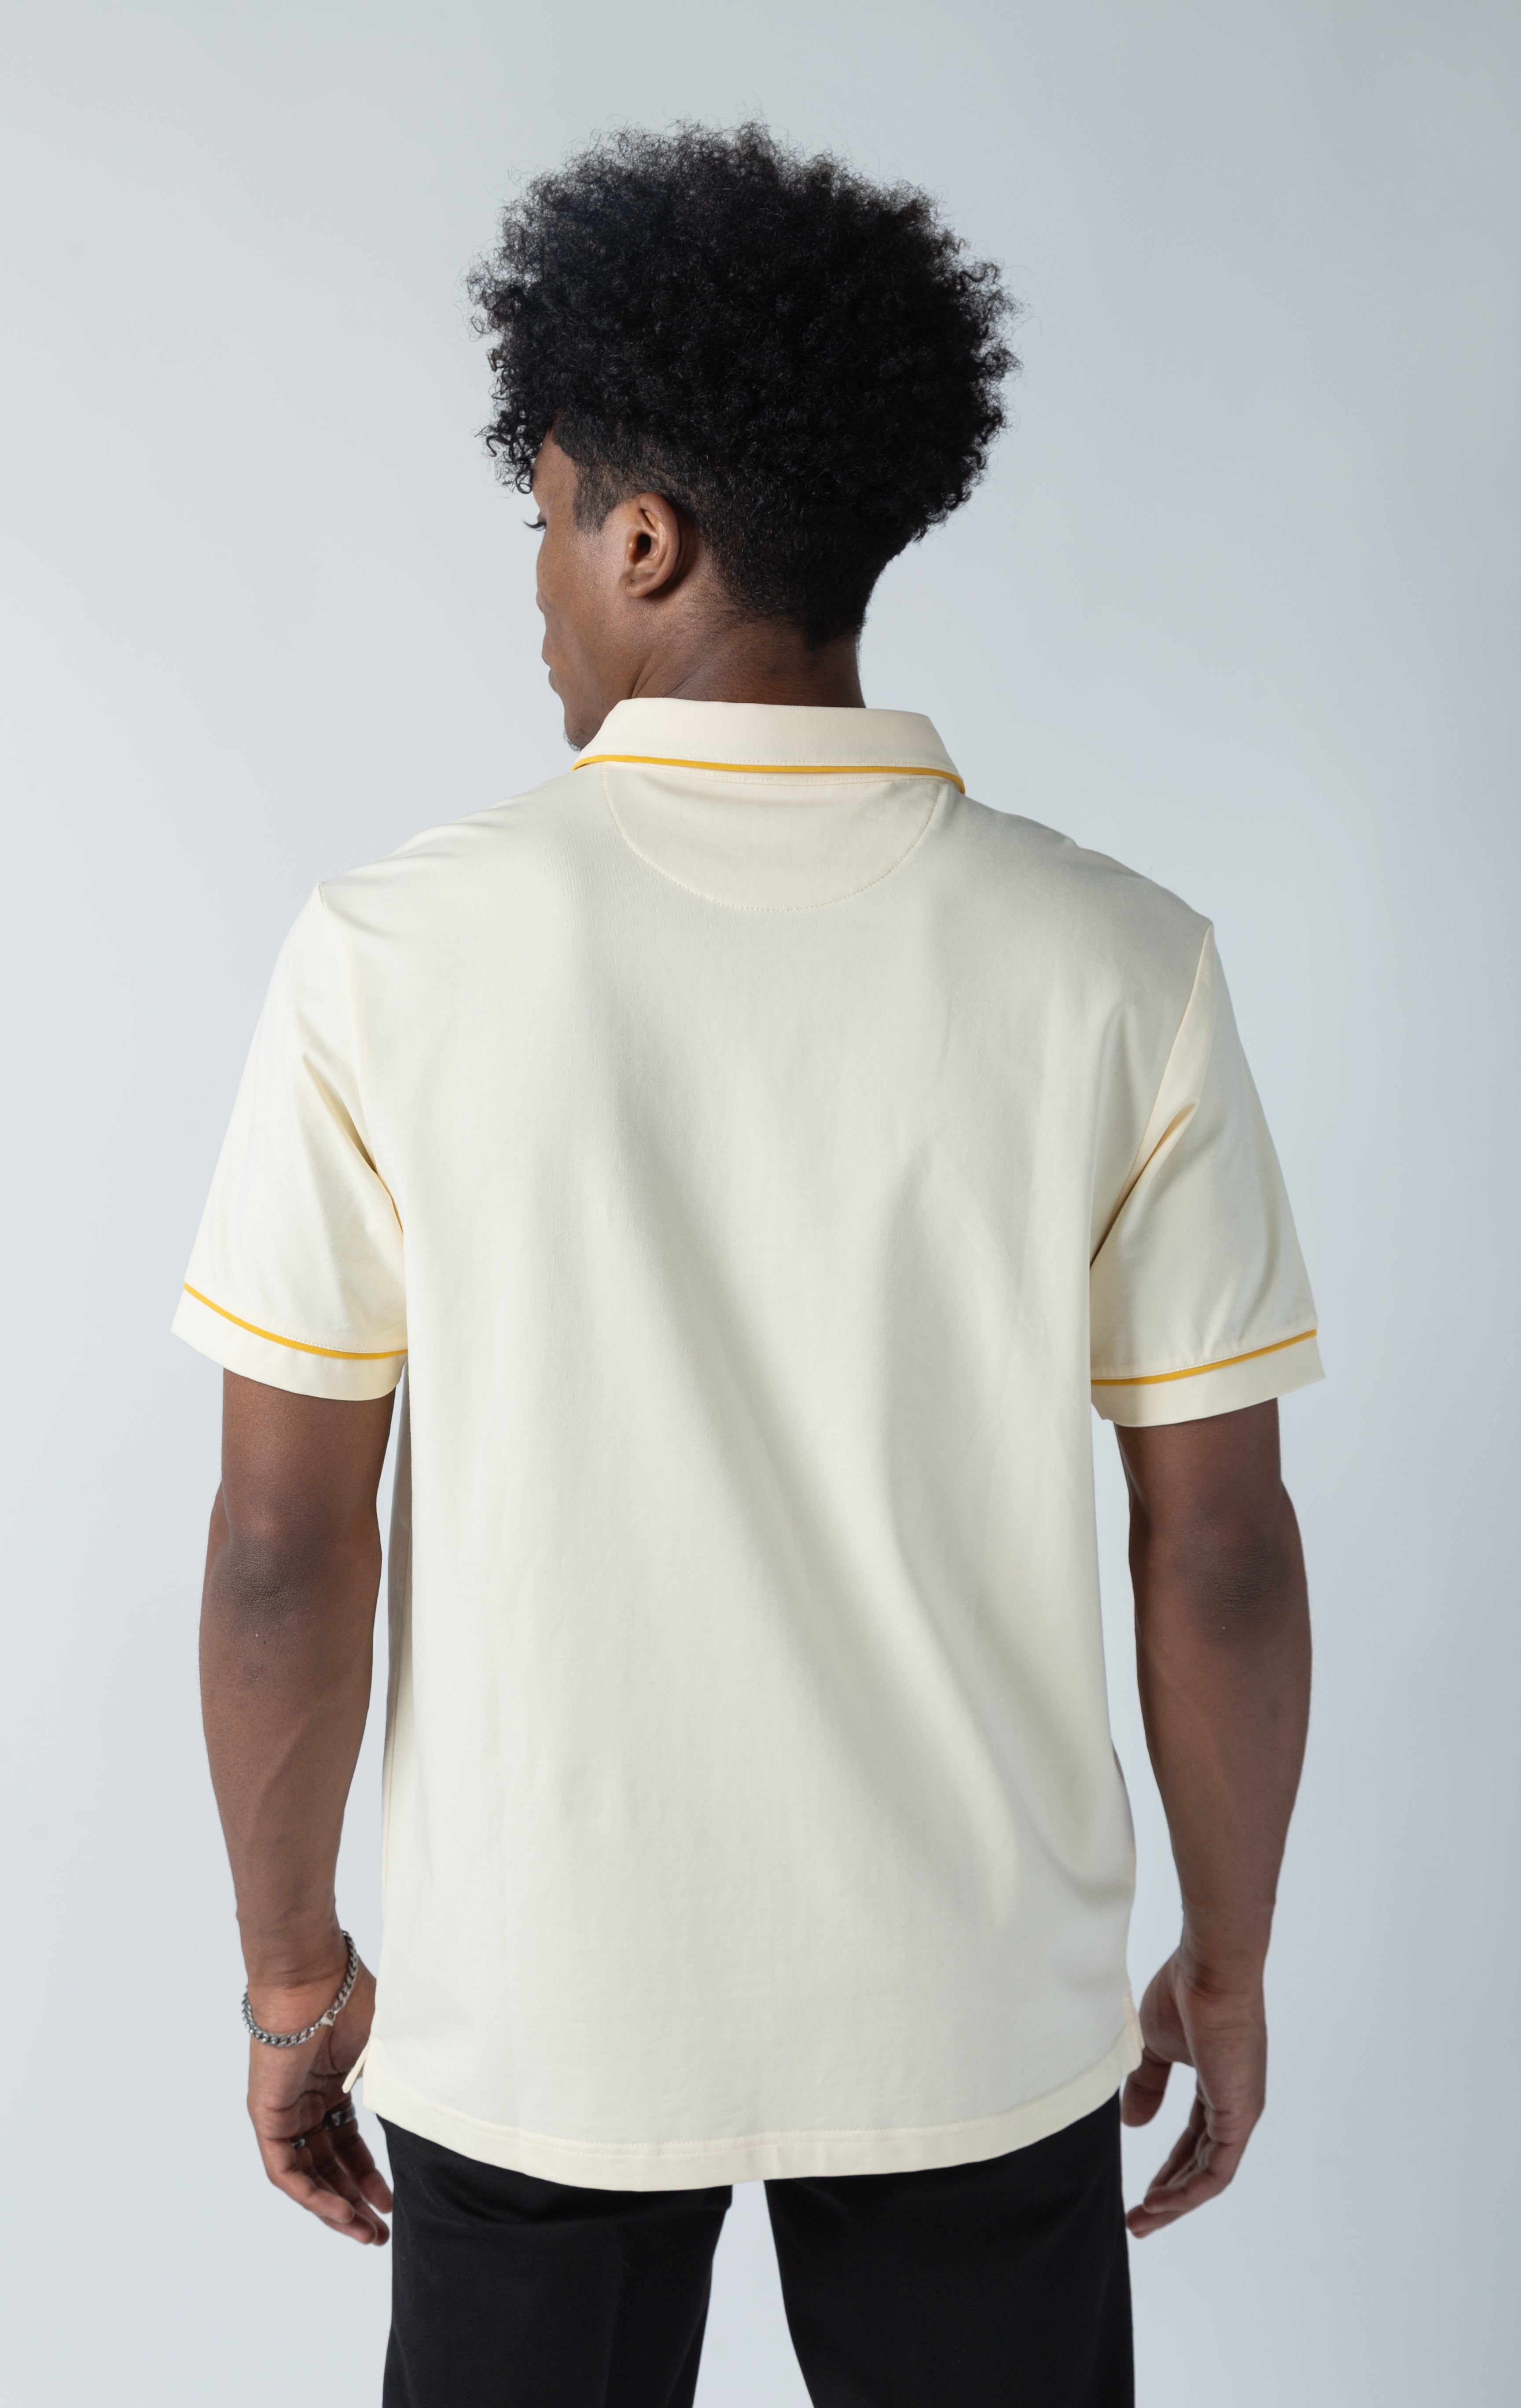 Natural color Luciano stretch premium jersey polo shirt with collared detailing, short-sleeved composition, three button front fastening. MAKOBI custom made design